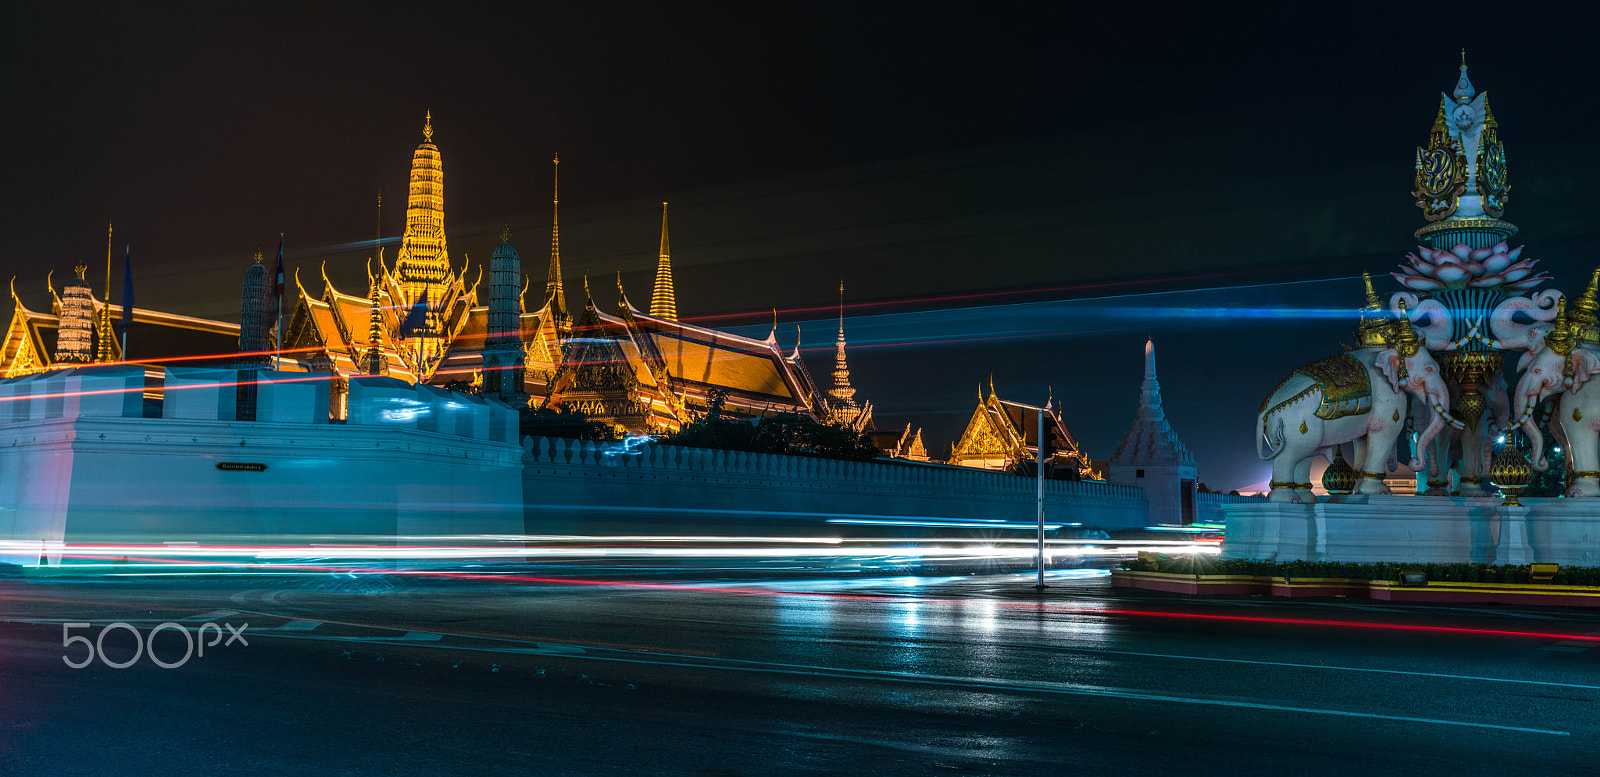 Sony a7R II sample photo. The grand palace photography